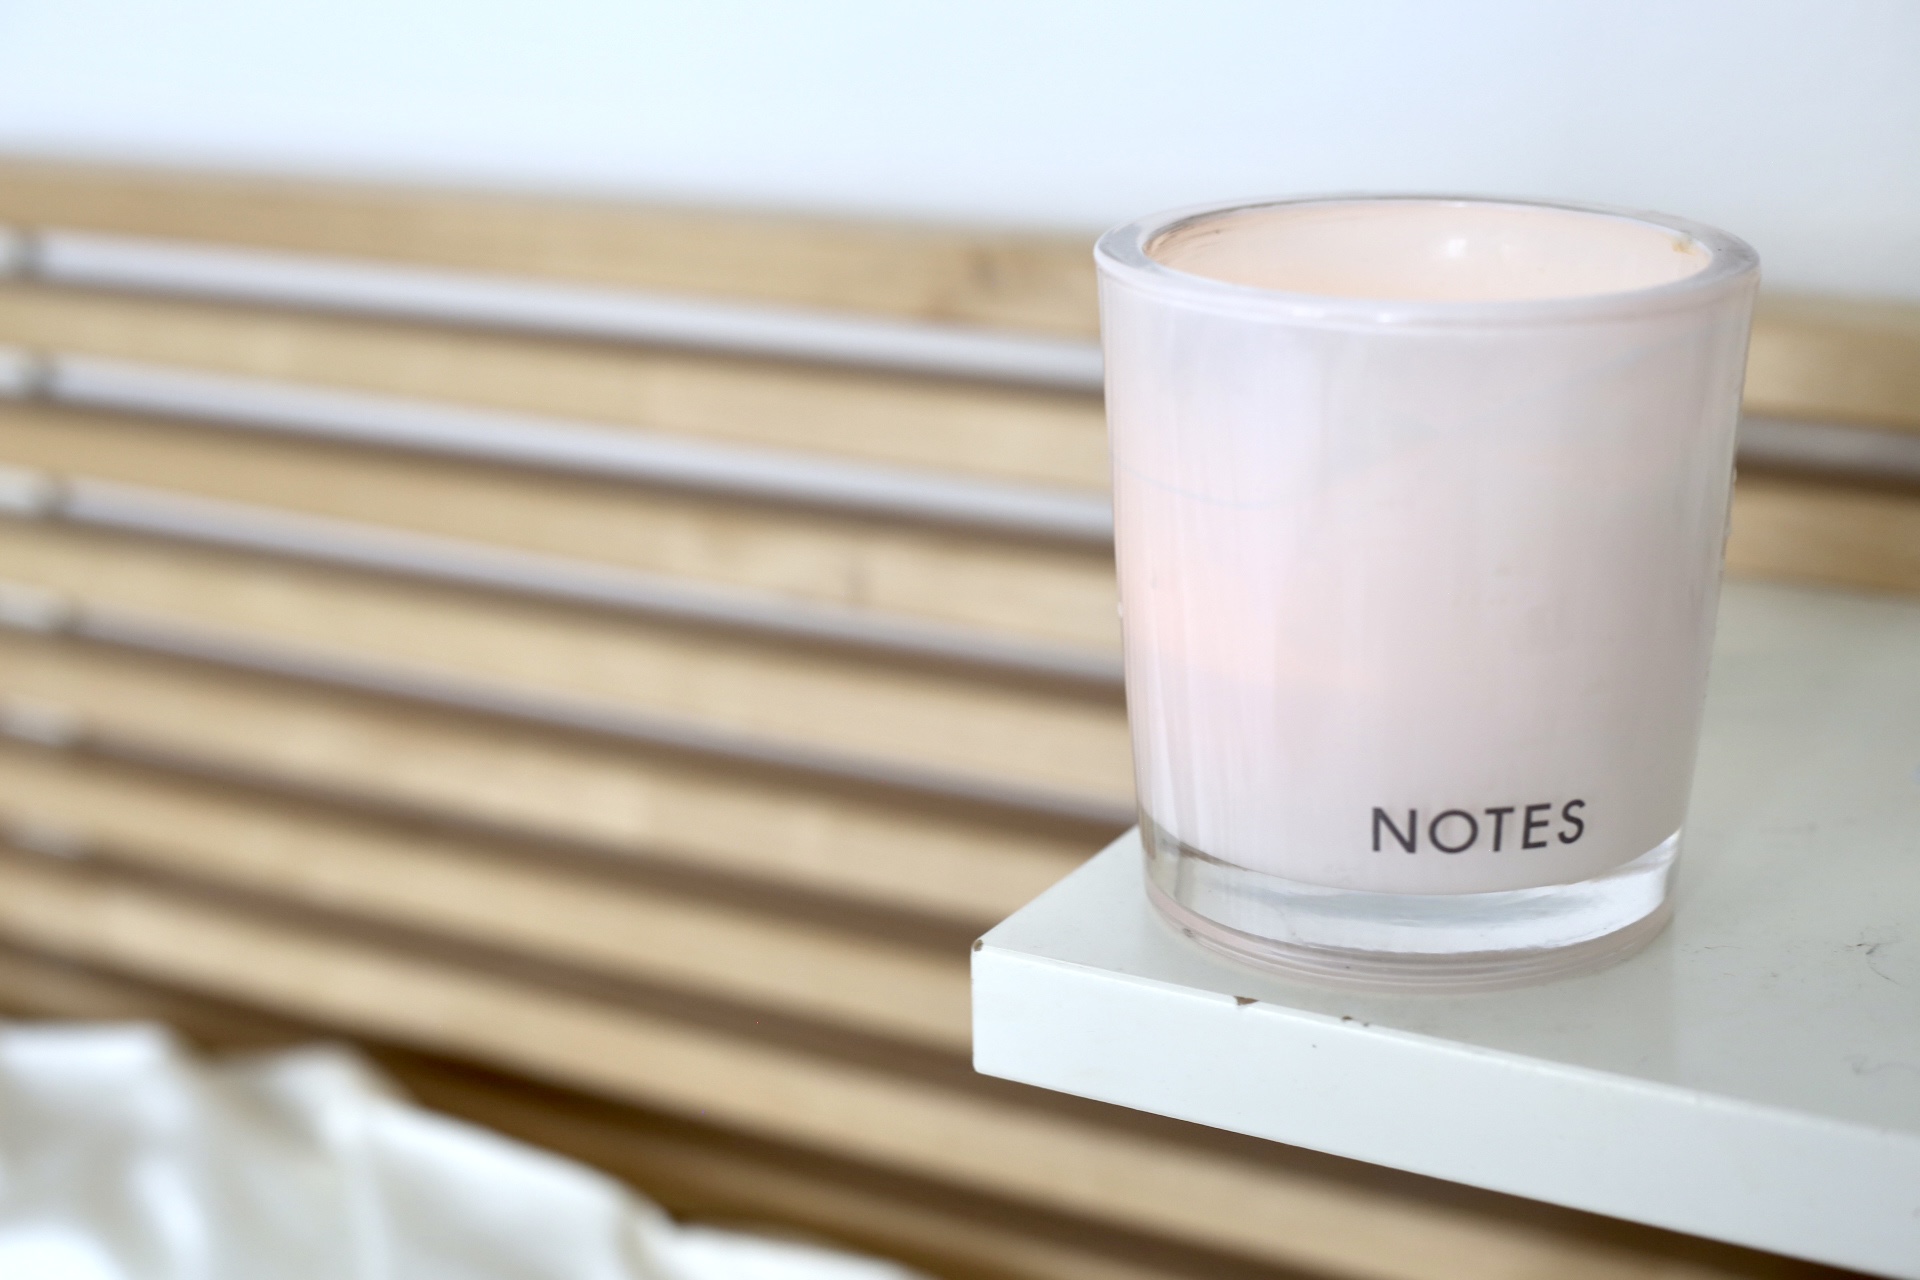 Notes candle